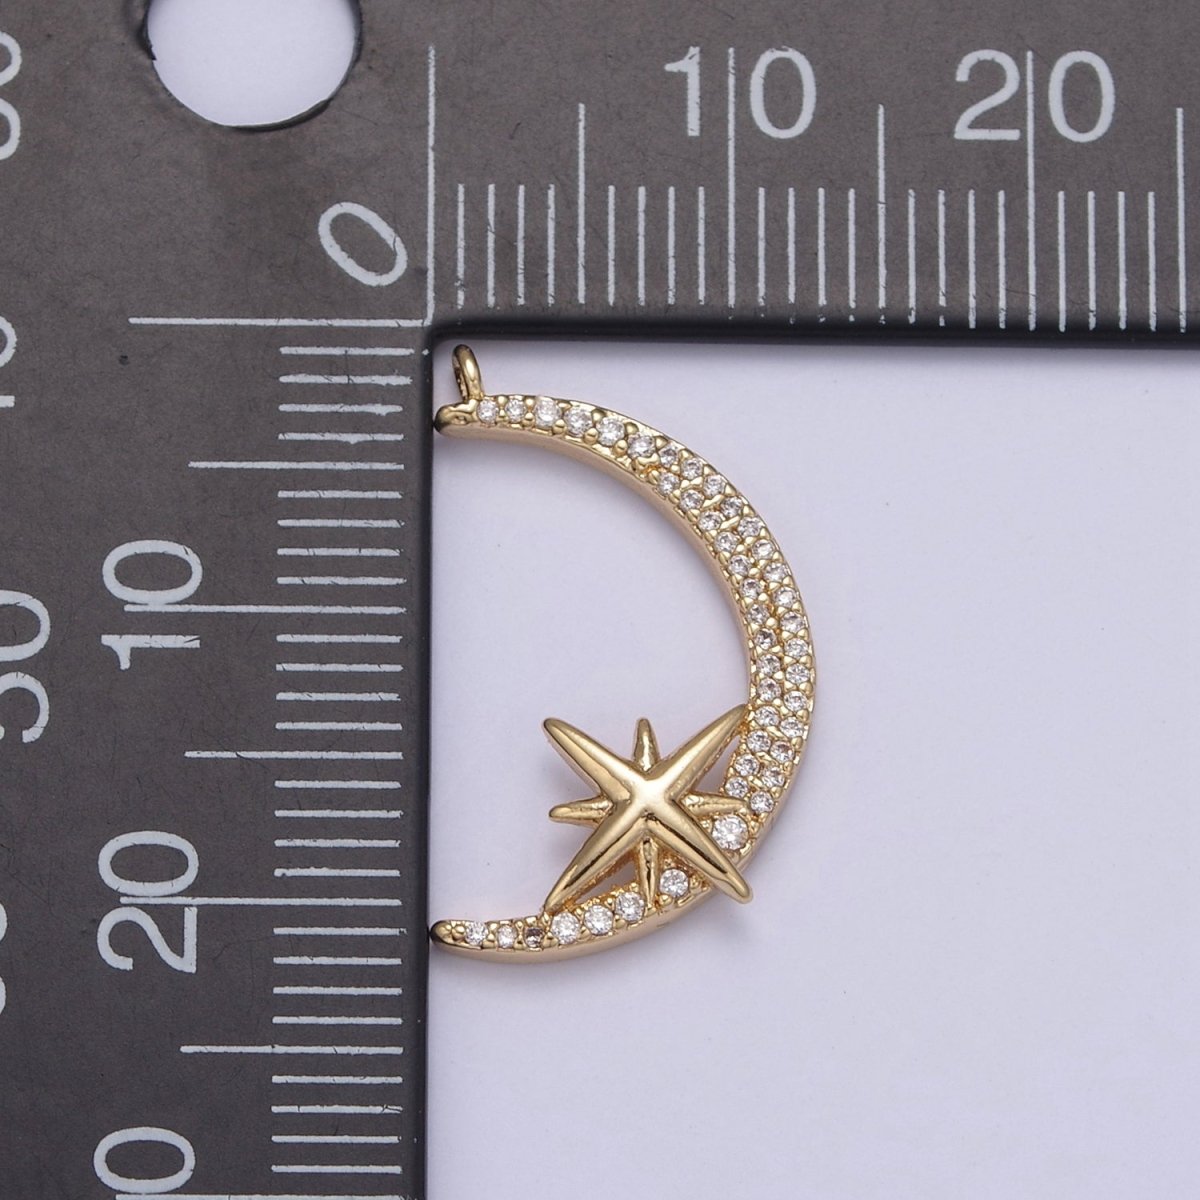 Dainty Cubic Crescent Moon Charm 24k Gold Filled Star Celestial Jewelry pendant N-681 - DLUXCA